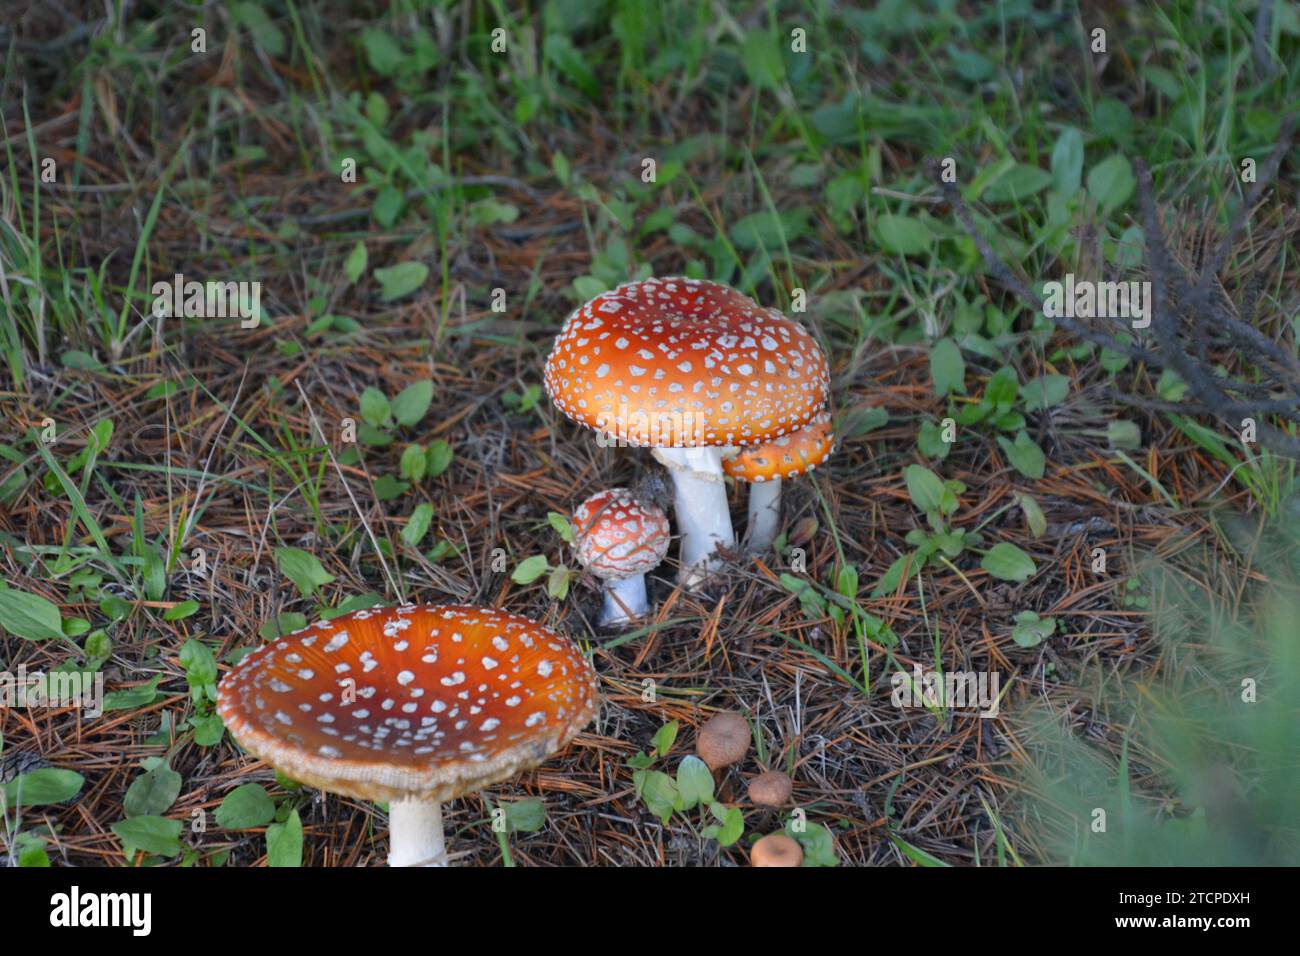 Bright red mushroom - Amanita muscaria, are very poisonous to humans and animals. These are from the Pacific Northwest in early fall. Stock Photo